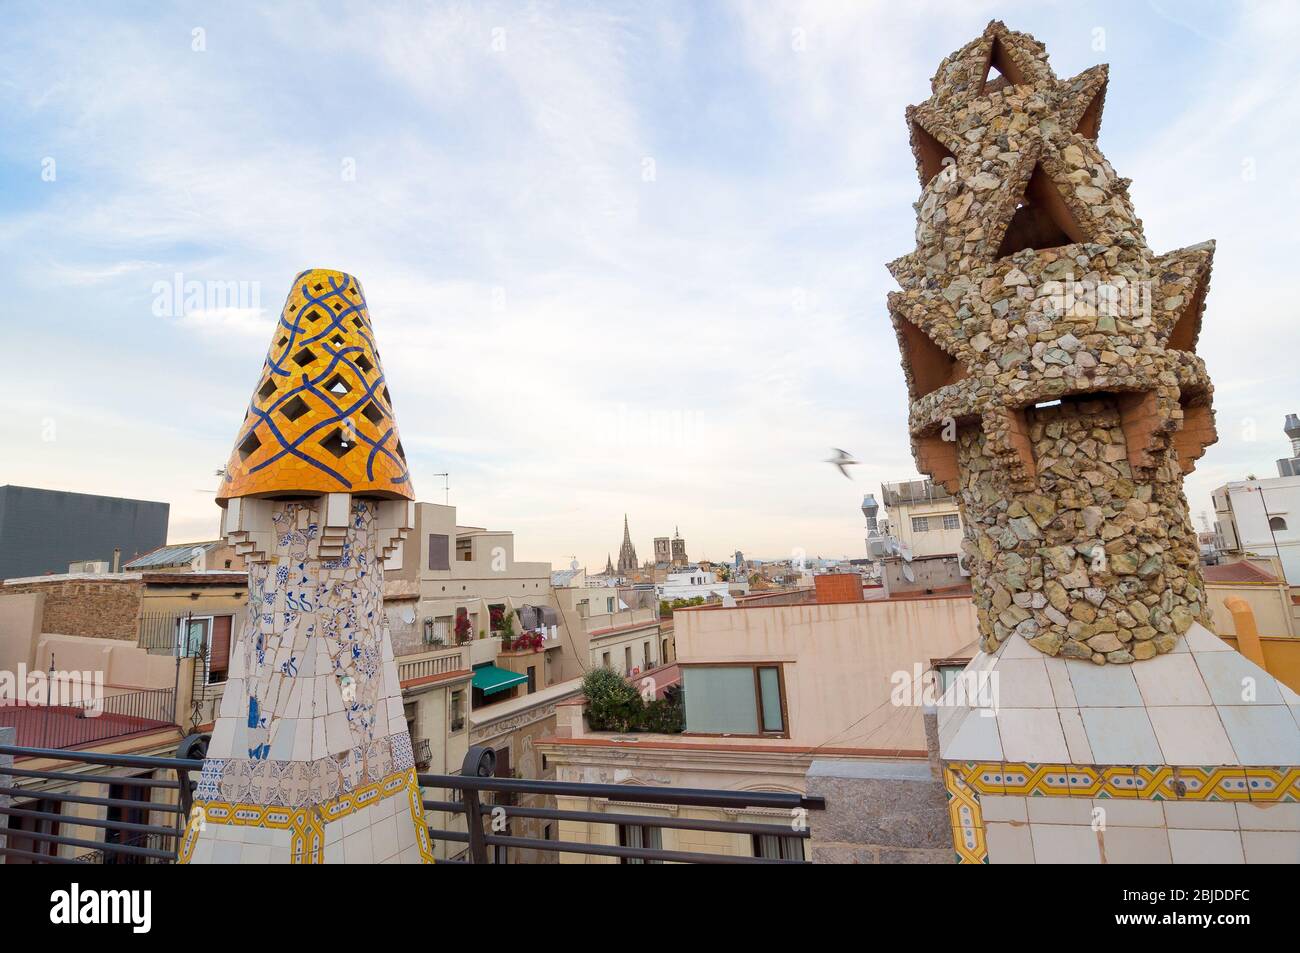 Barcelona, Spain - September 20, 2014: Design of the roof of Palace Guell - Gaudi Chimney: broken tile mosaics and strange decorated chimneys are evid Stock Photo